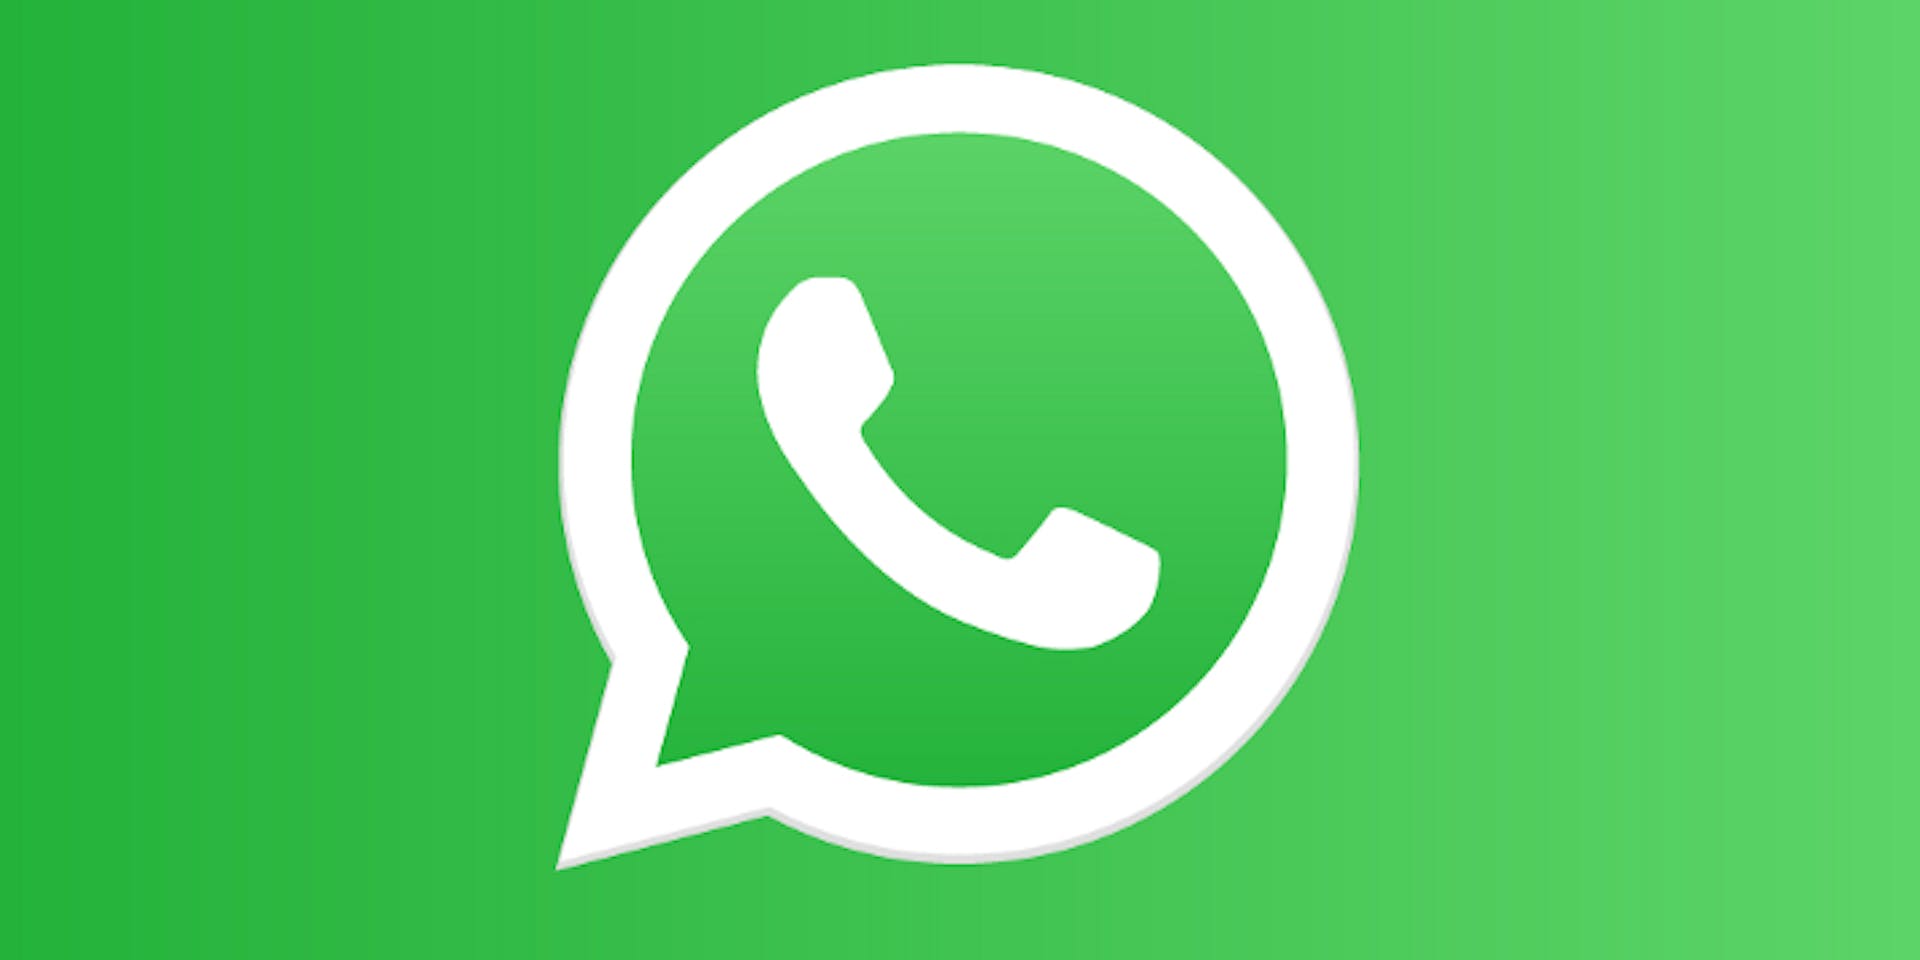 featured image - Creating a WhatsApp bot Using NodeJs, Repl.it and Twilio API